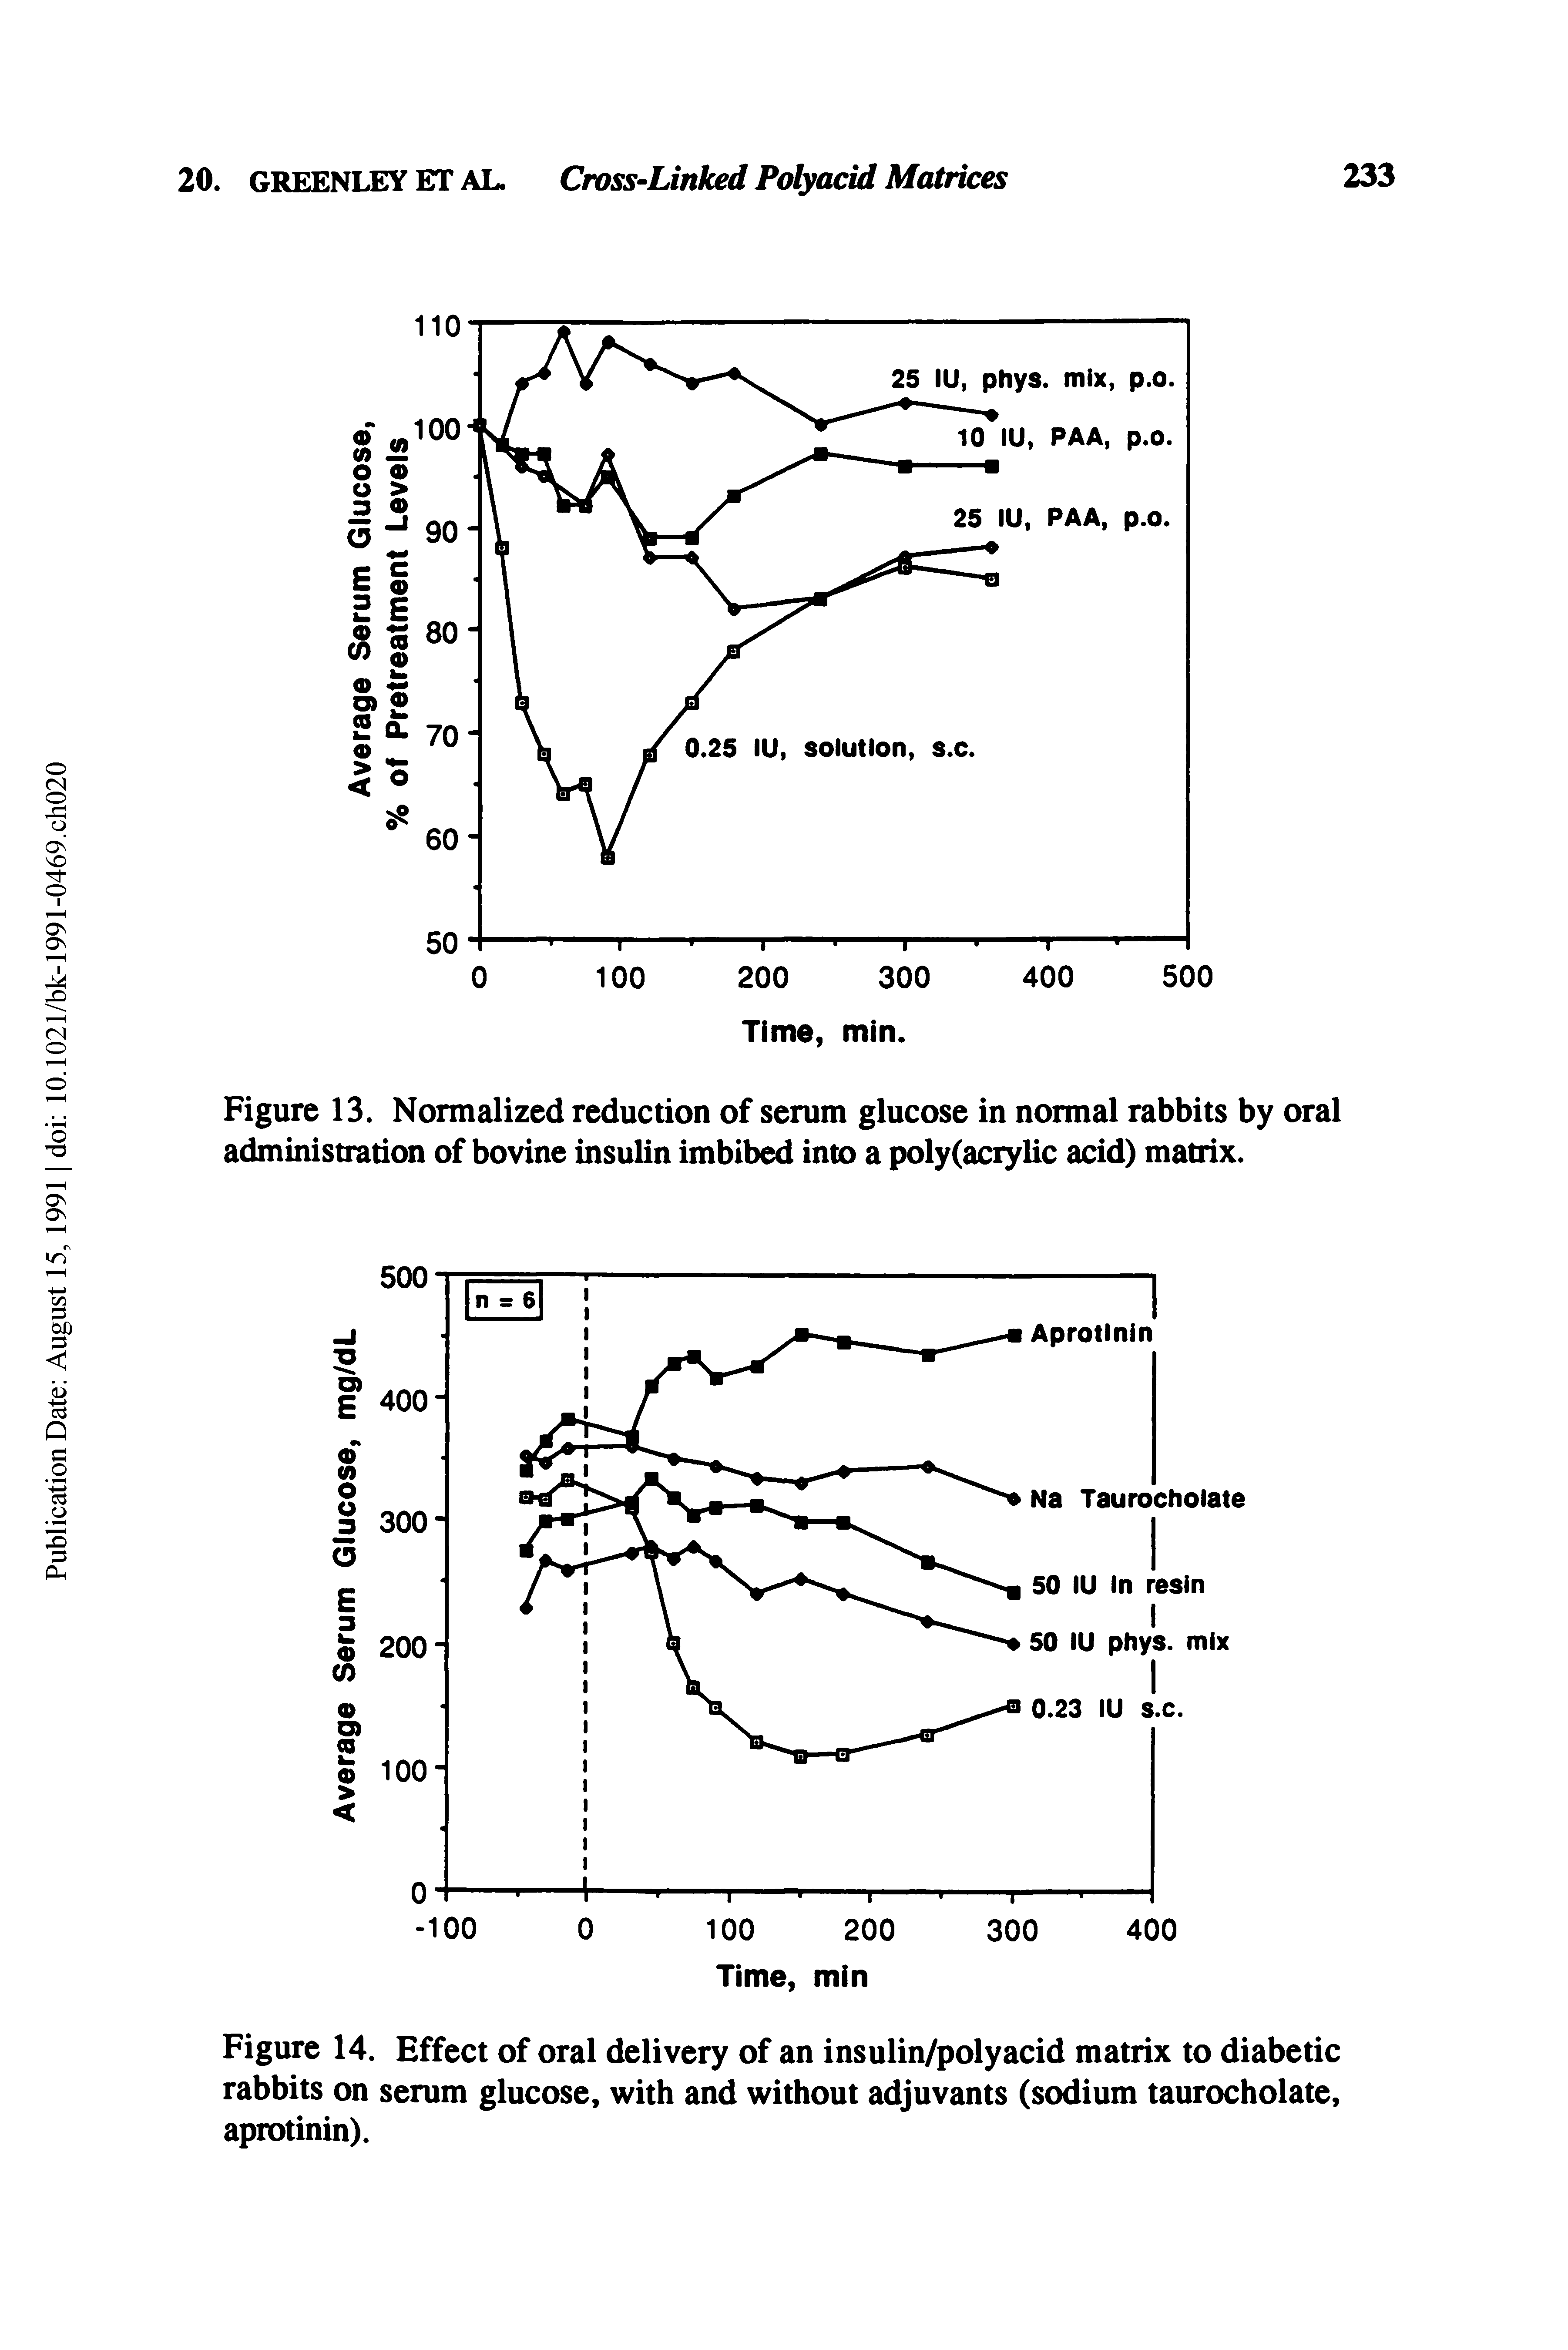 Figure 14. Effect of oral delivery of an insulin/polyacid matrix to diabetic rabbits on serum glucose, with and without adjuvants (sodium taurocholate, aprotinin).